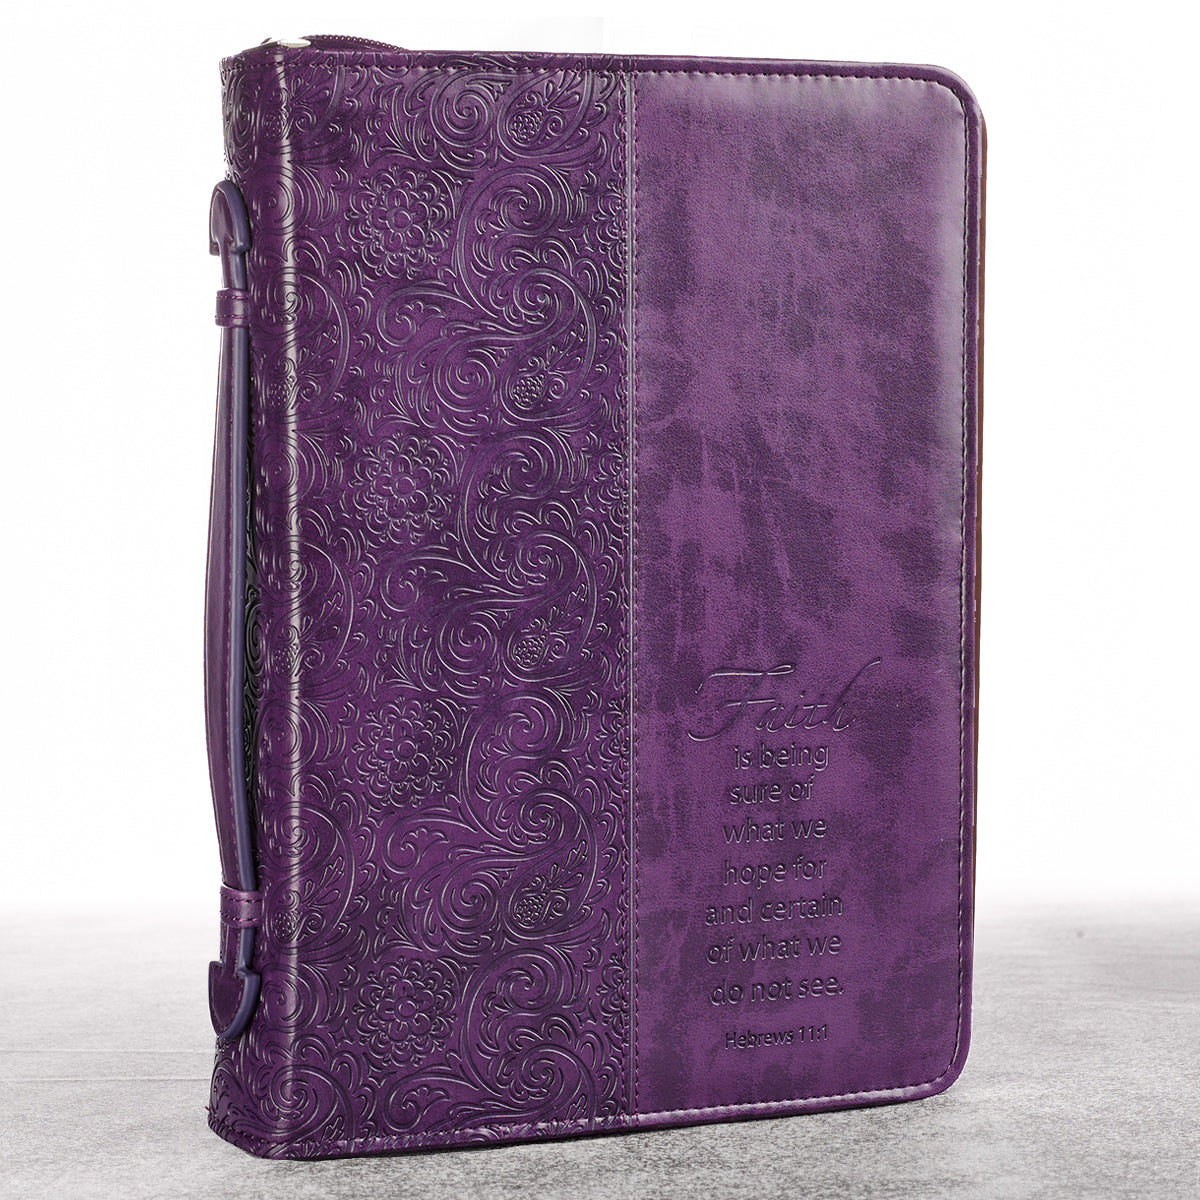 Faith Purple Faux Leather Fashion Bible Cover - Hebrews 11:1 - The Christian Gift Company